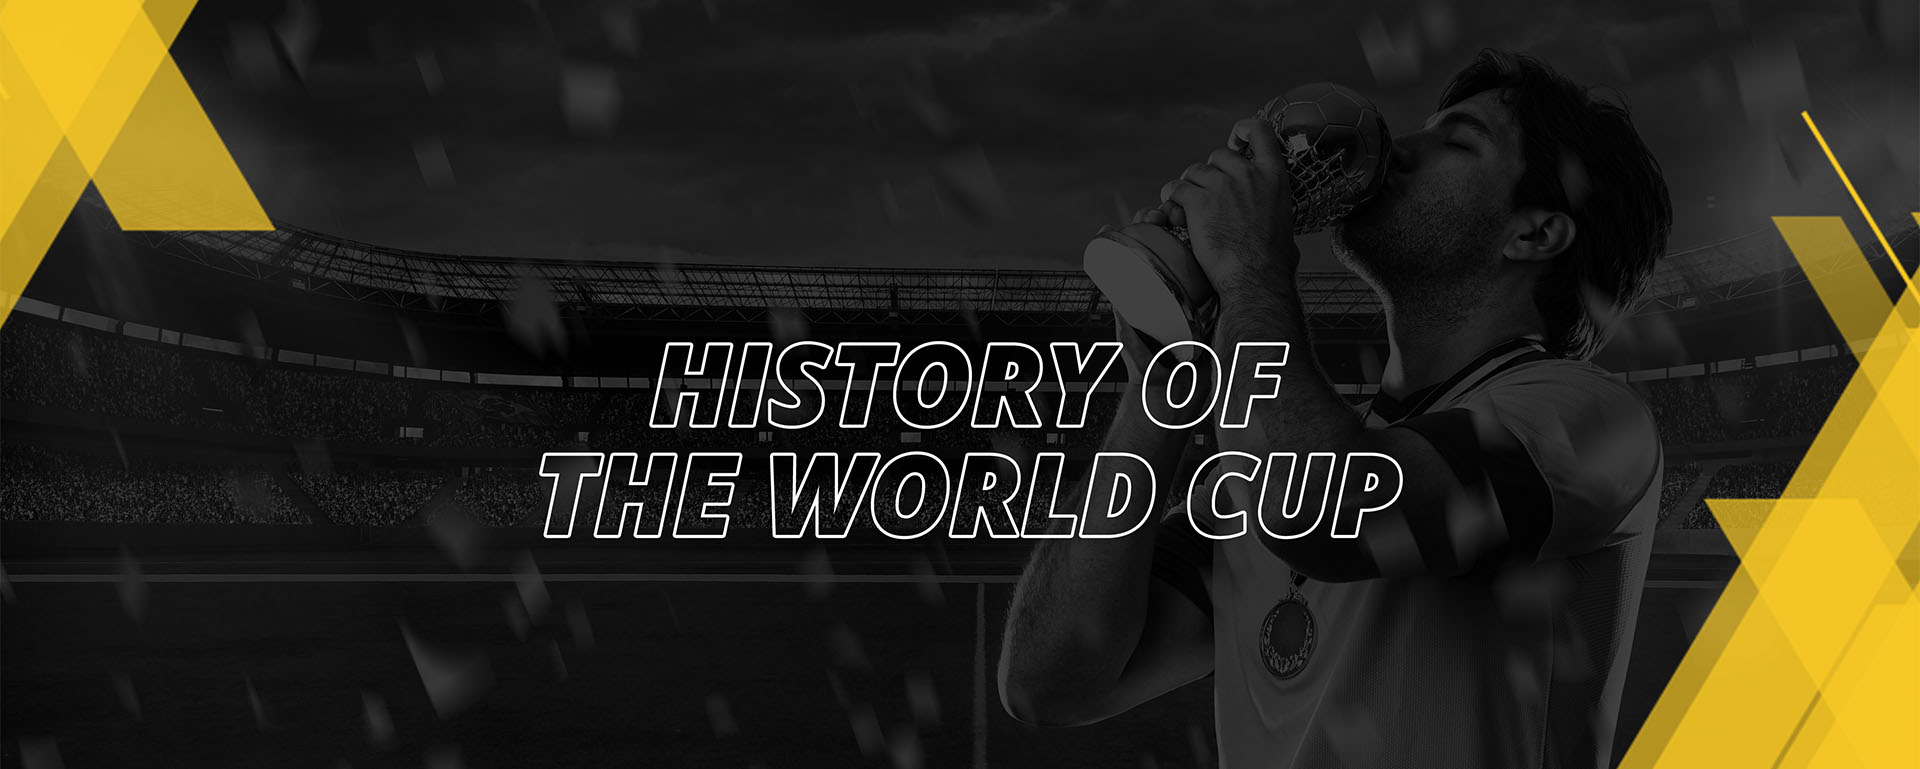 HISTORY OF THE WORLD CUP